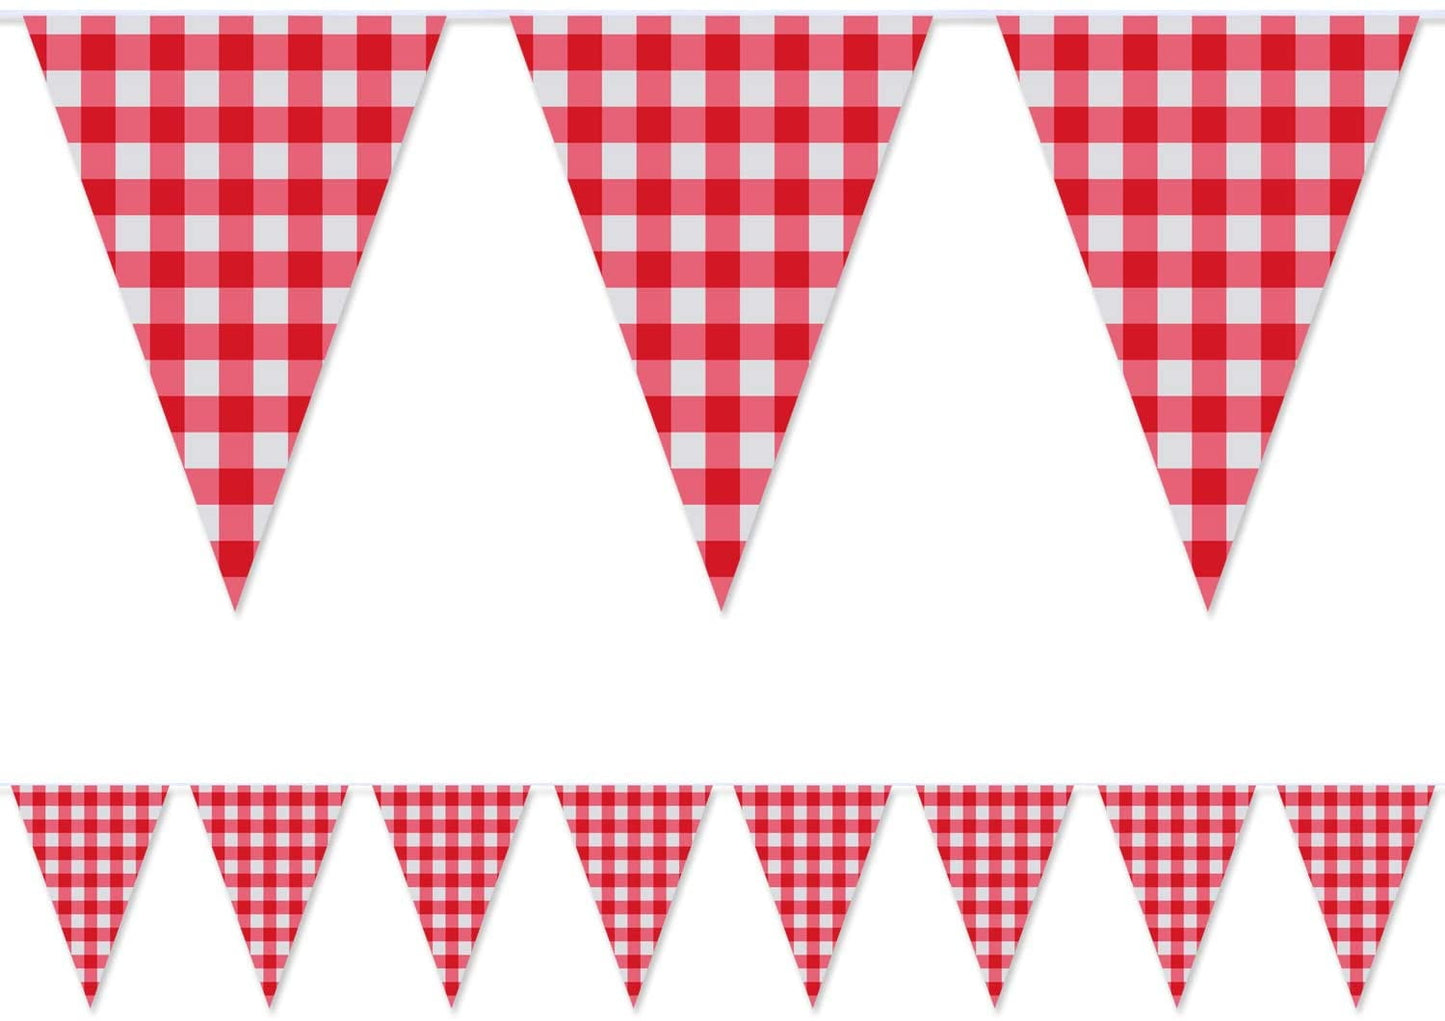 98.4 Feet Large Plastic Red and White Checkered Pennant Banner Gingham Triangle Banner Red and White Banner for Picnic BBQ Birthday Christma